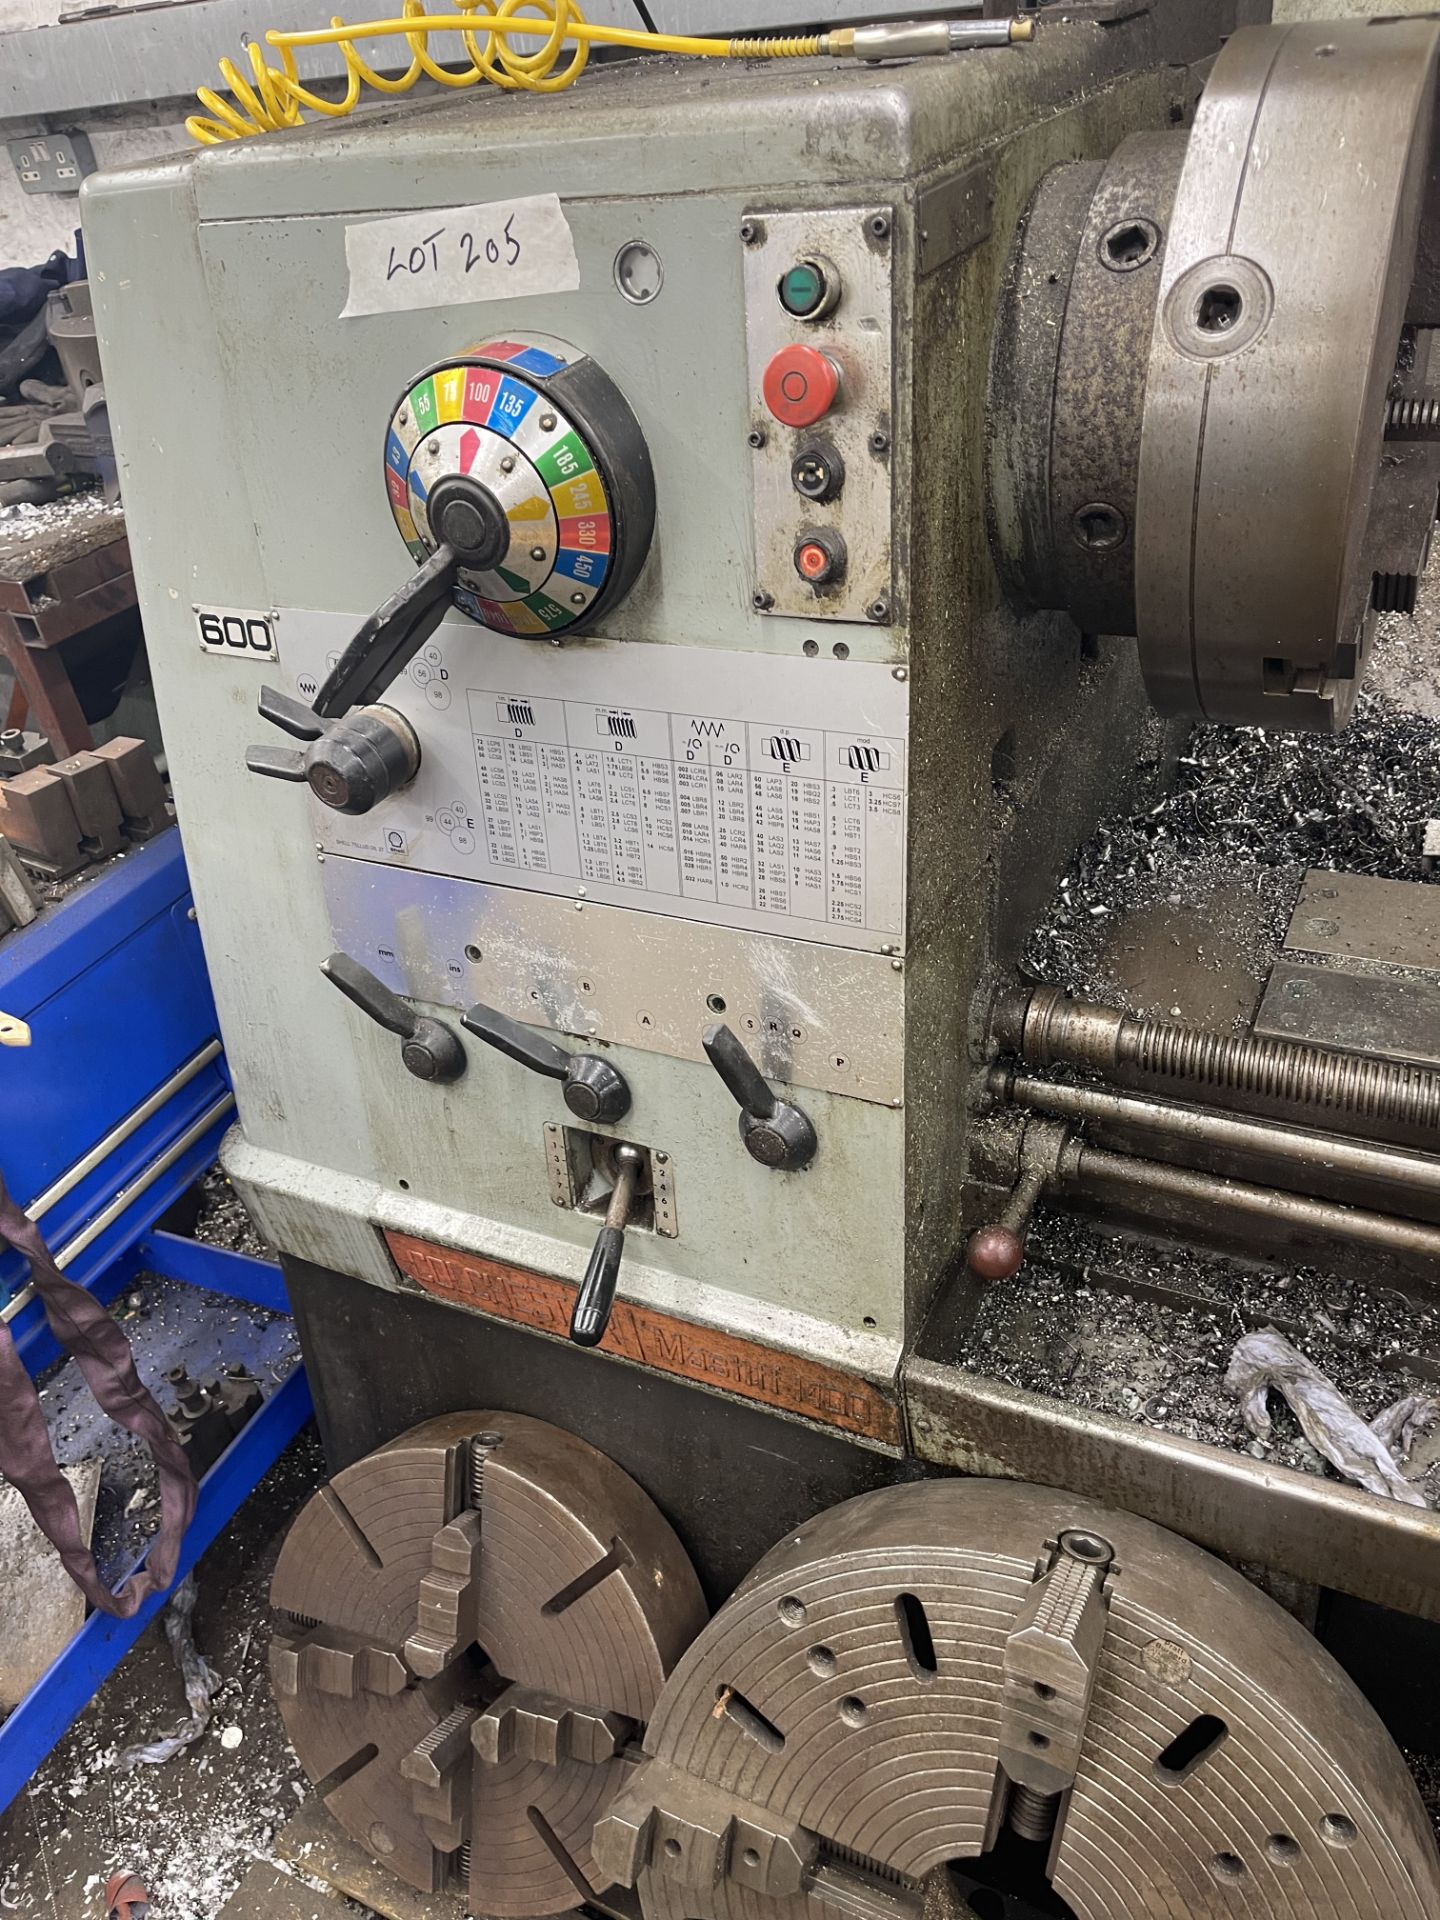 Colchester Mastiff 1400 GAP BED LATHE, taper turning, 3 and 4 jaw chucks, face plate, fixed